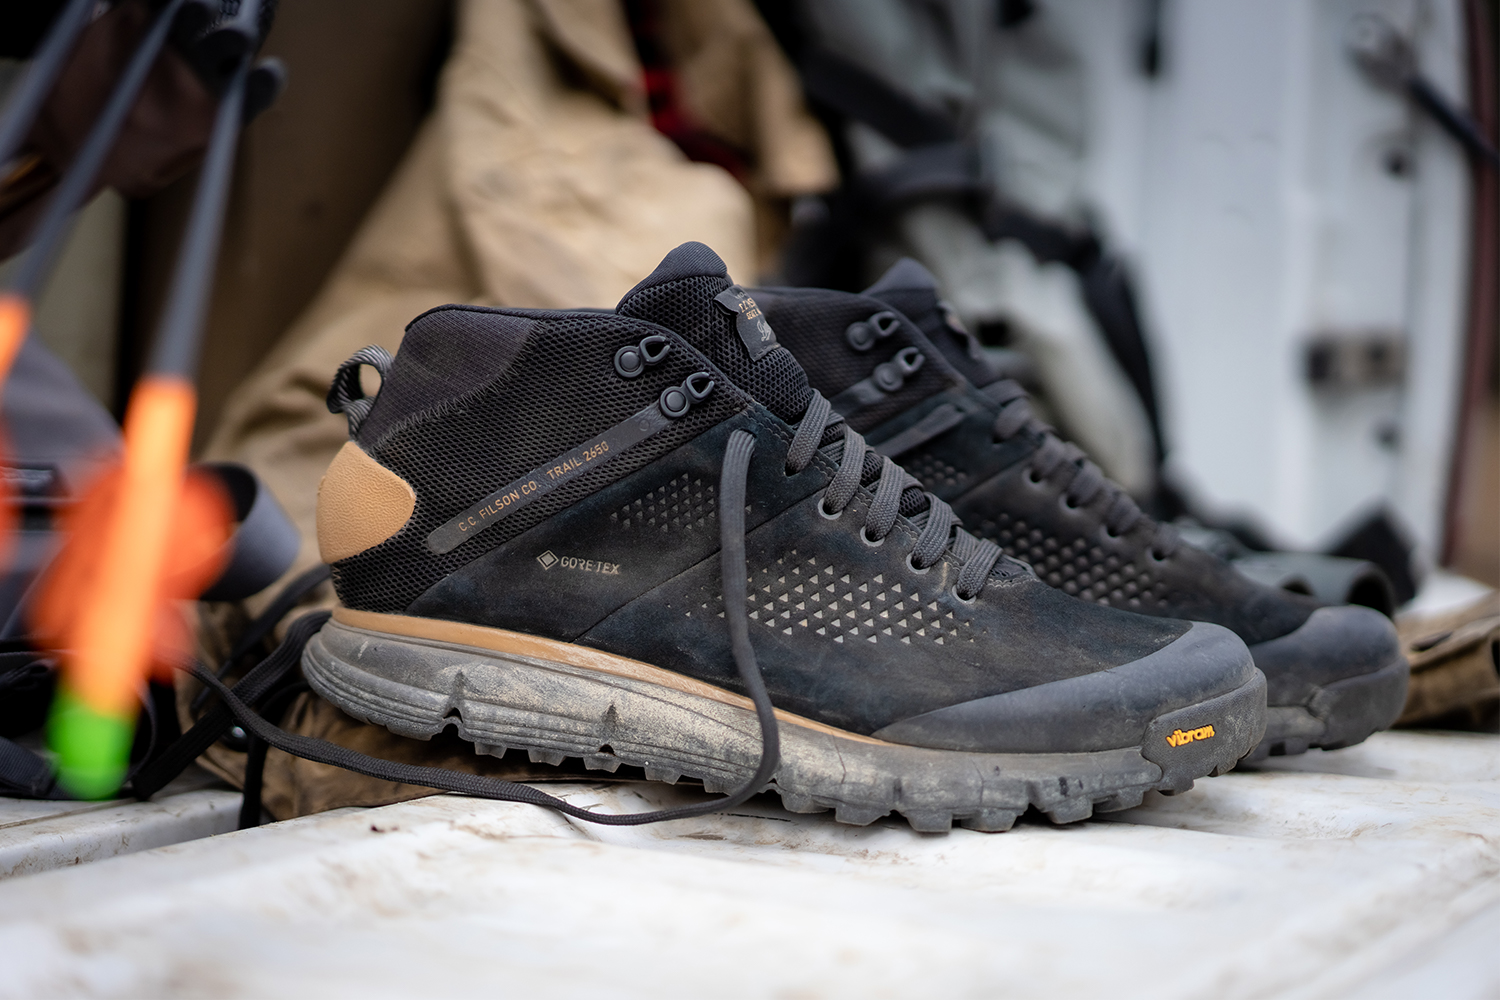 Filson and Danner Collab on Limited Trail 2650 Hiking Boots